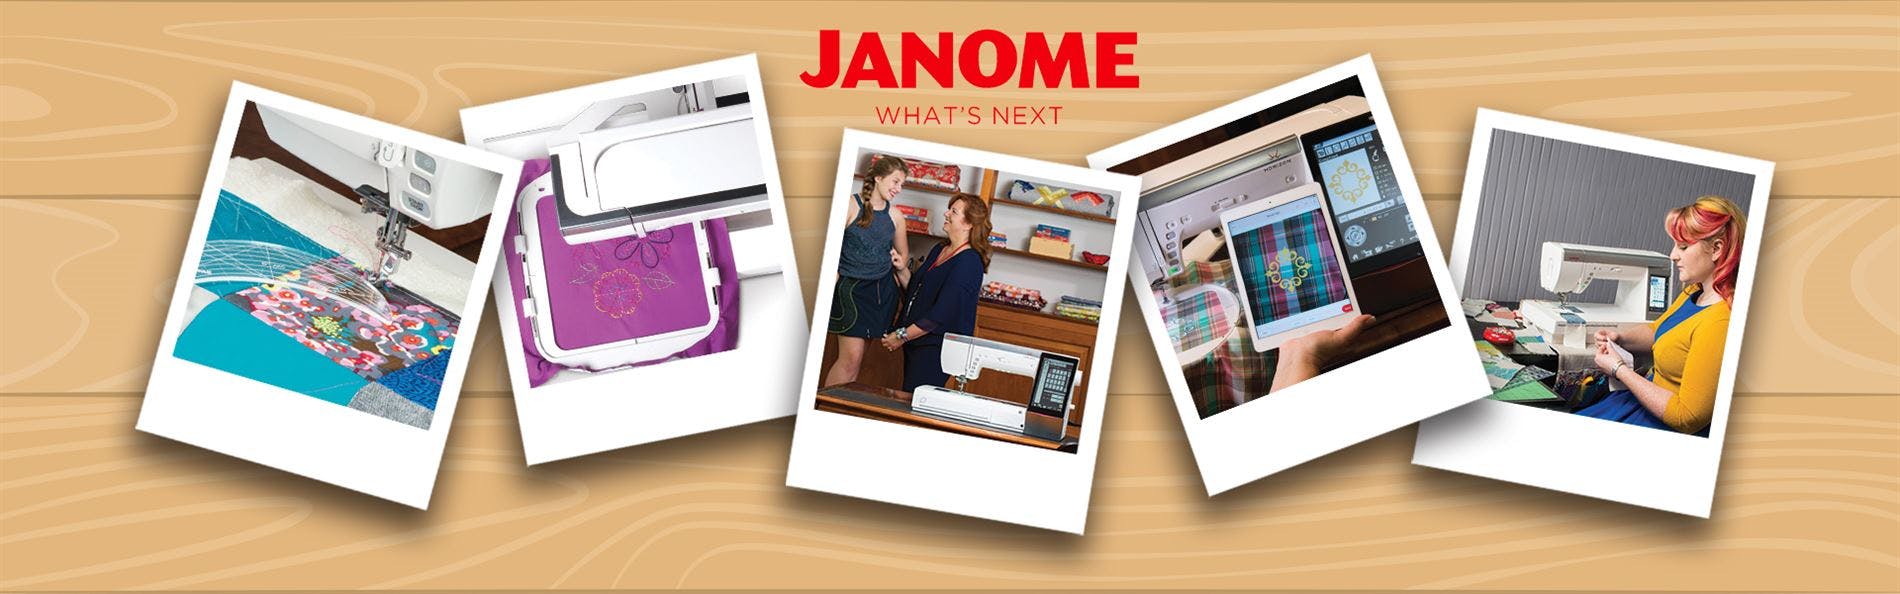 Janome banner